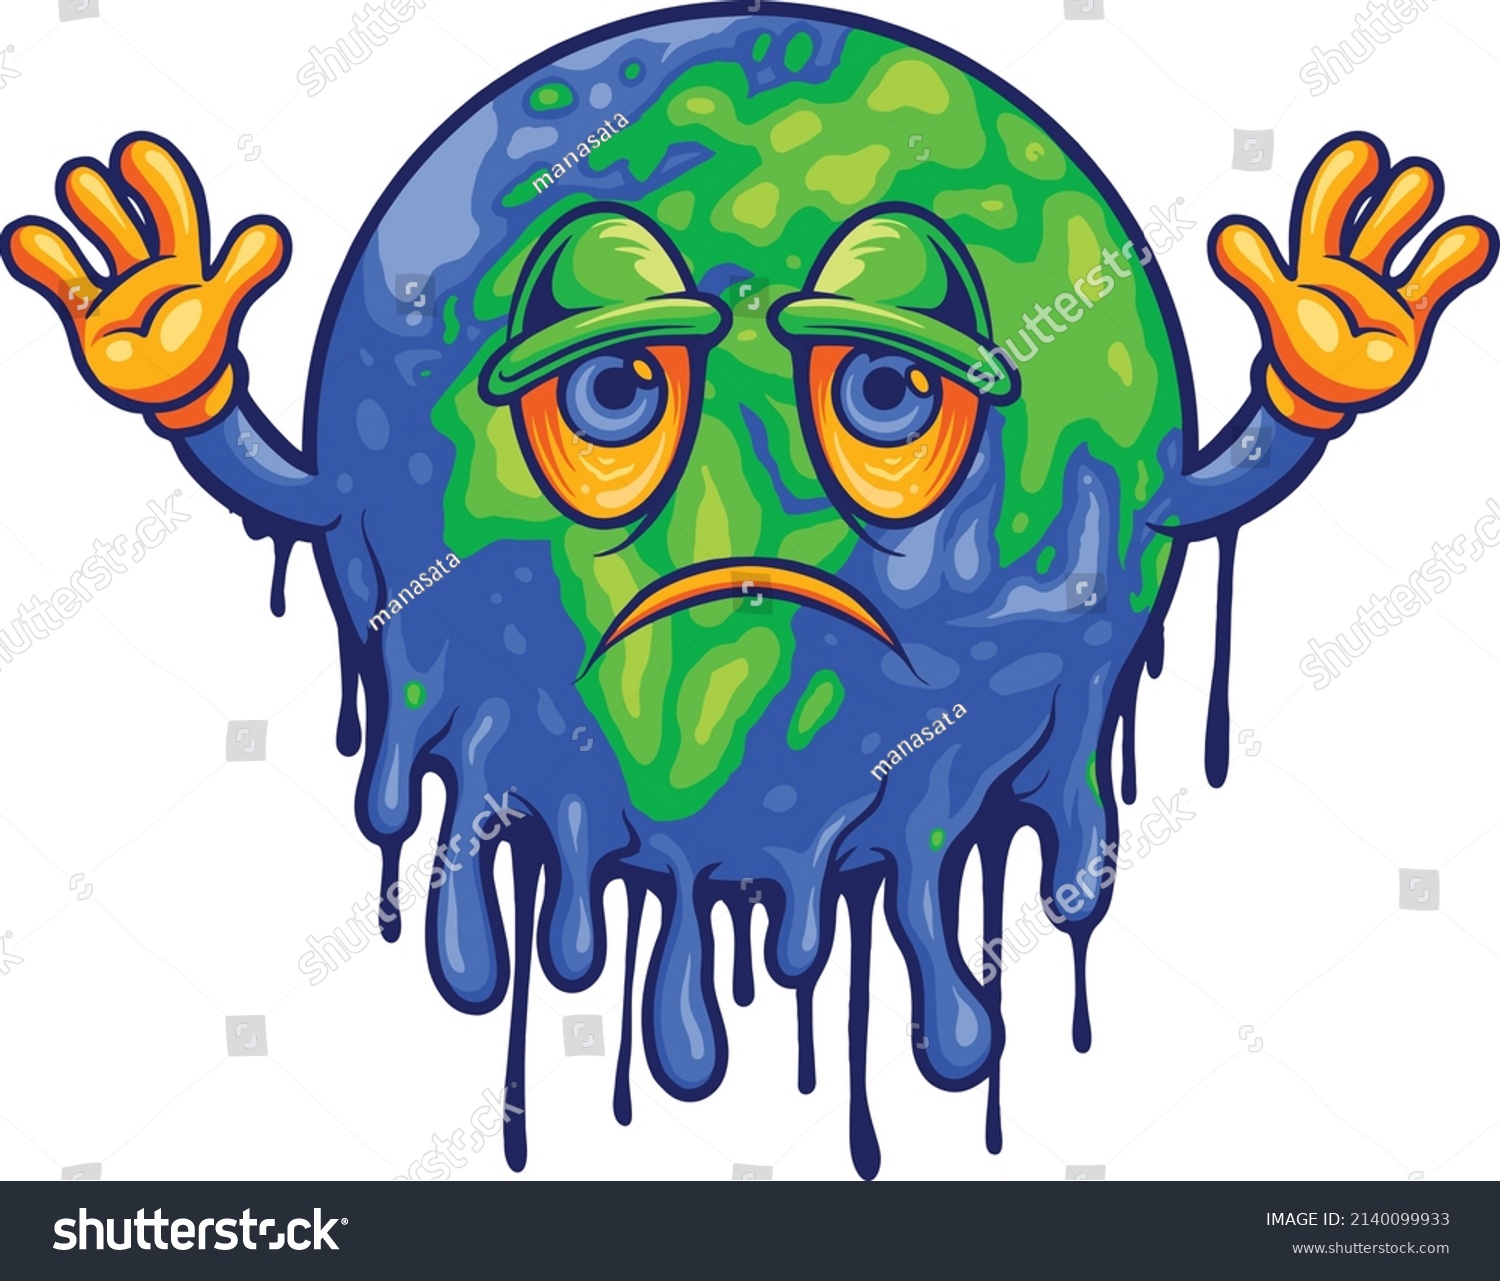 SVG of Happy world earth day with melted globe vector illustrations for your work logo, merchandise t-shirt, stickers and label designs, poster, greeting cards advertising business company or brands svg